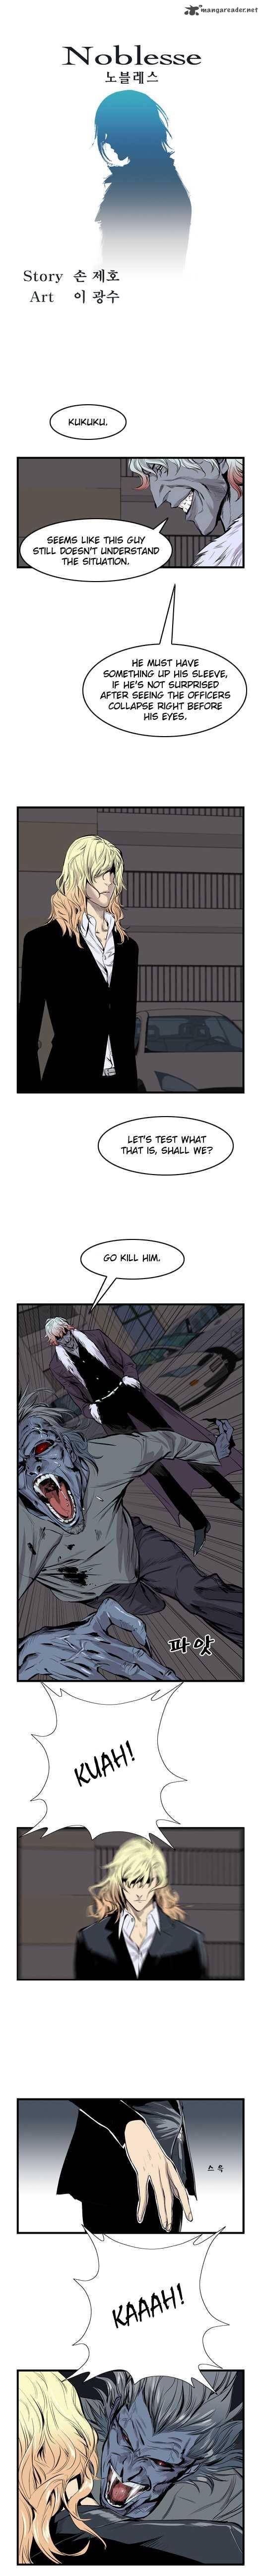 Noblesse Chapter 44 Page 1